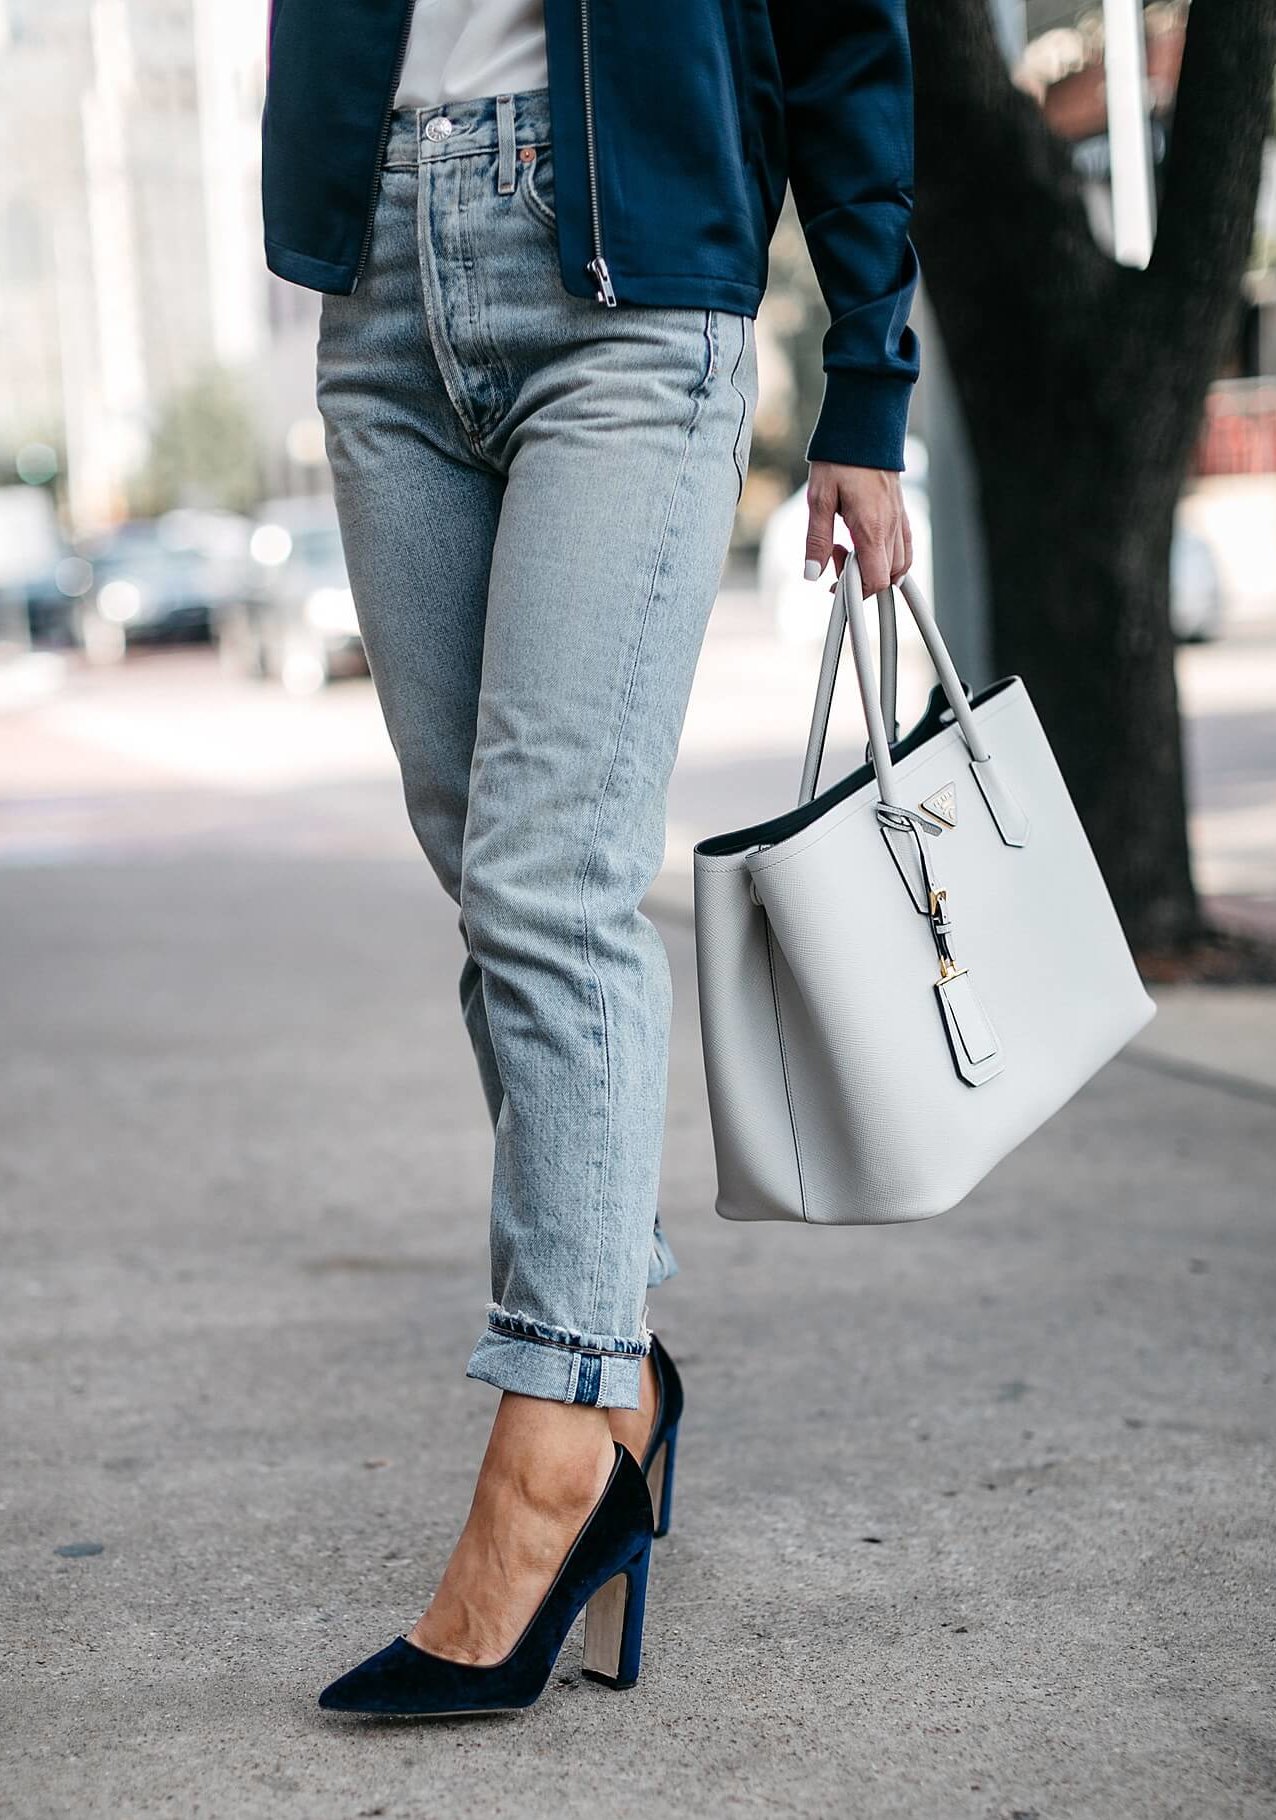 satin bomber, white club monaco camisole, light wash high-waisted mom jeans cuffed at ankle, and dee keller parker navy velvet heel